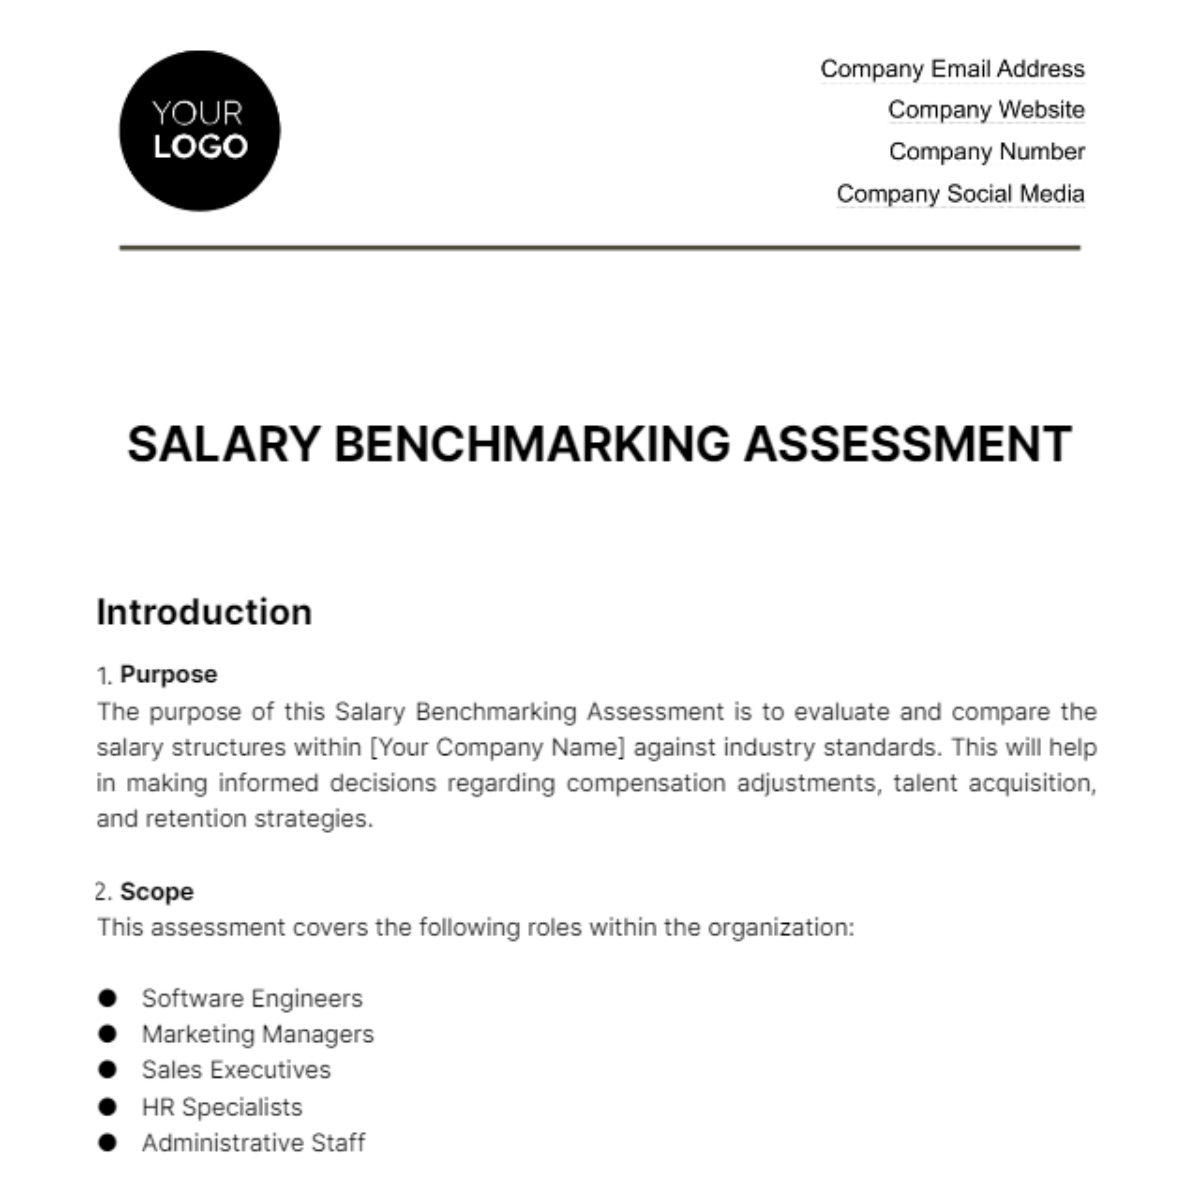 Free Salary Benchmarking Assessment HR Template